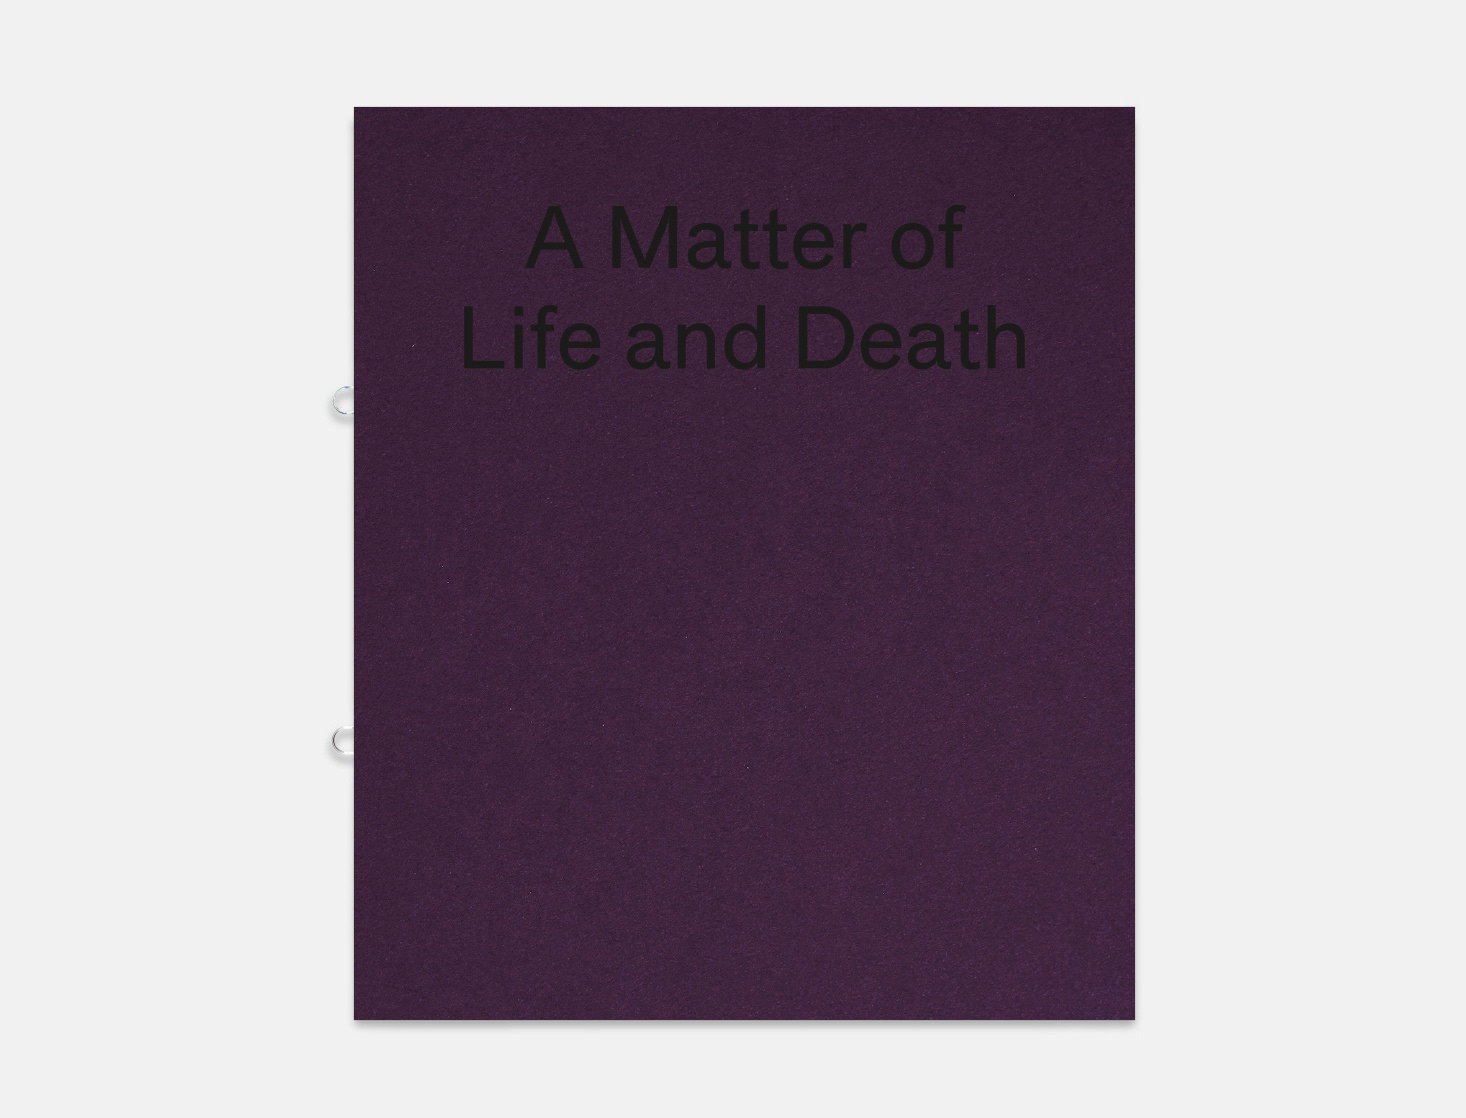  A Matter of Life and Death